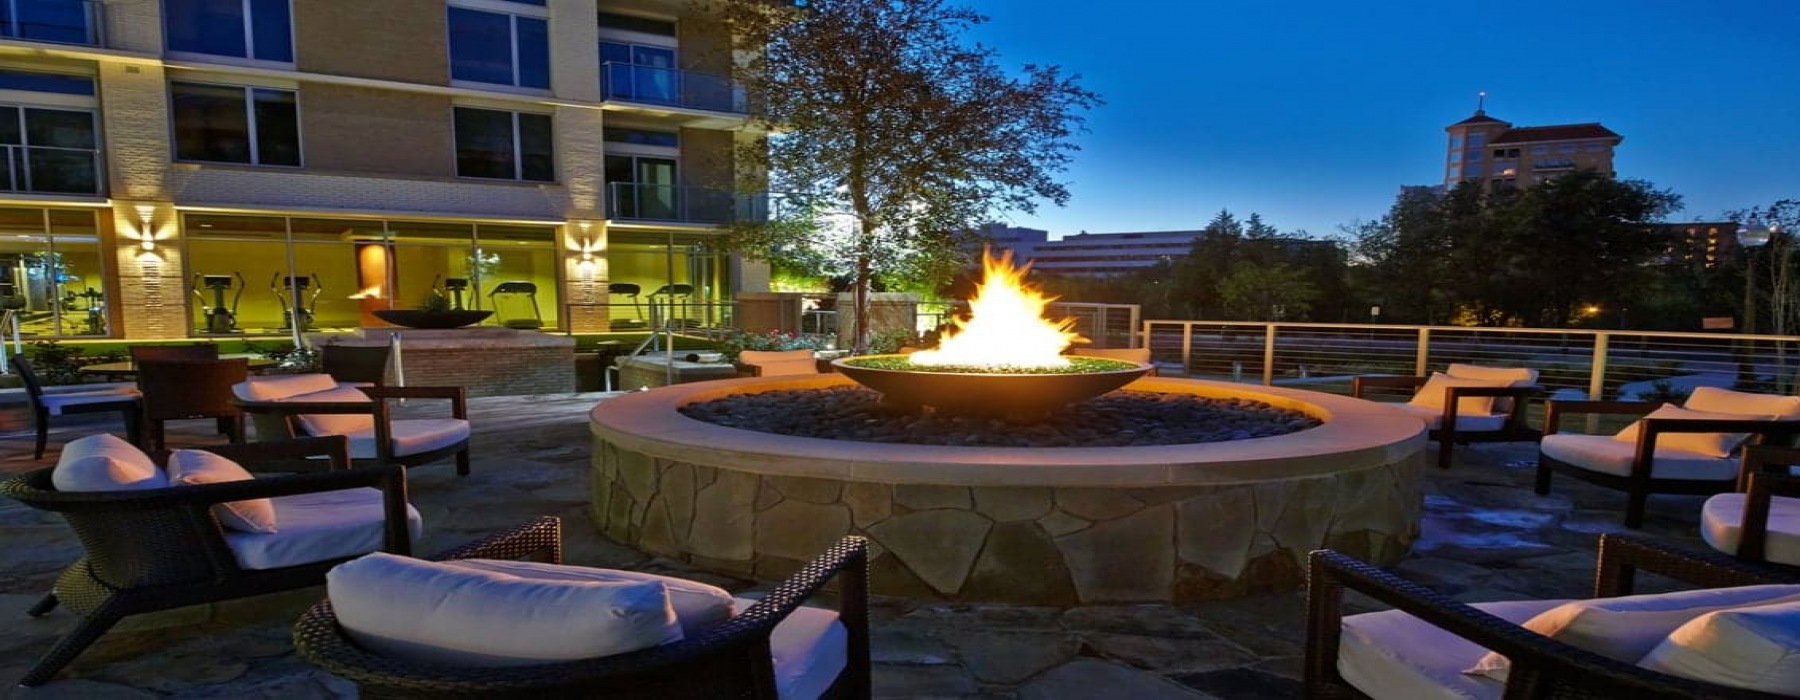 +katy trail access, +katy trail ice house, +katy trail, +fire pit and gas grills, +yoga lawn, +dog park, +pet spa